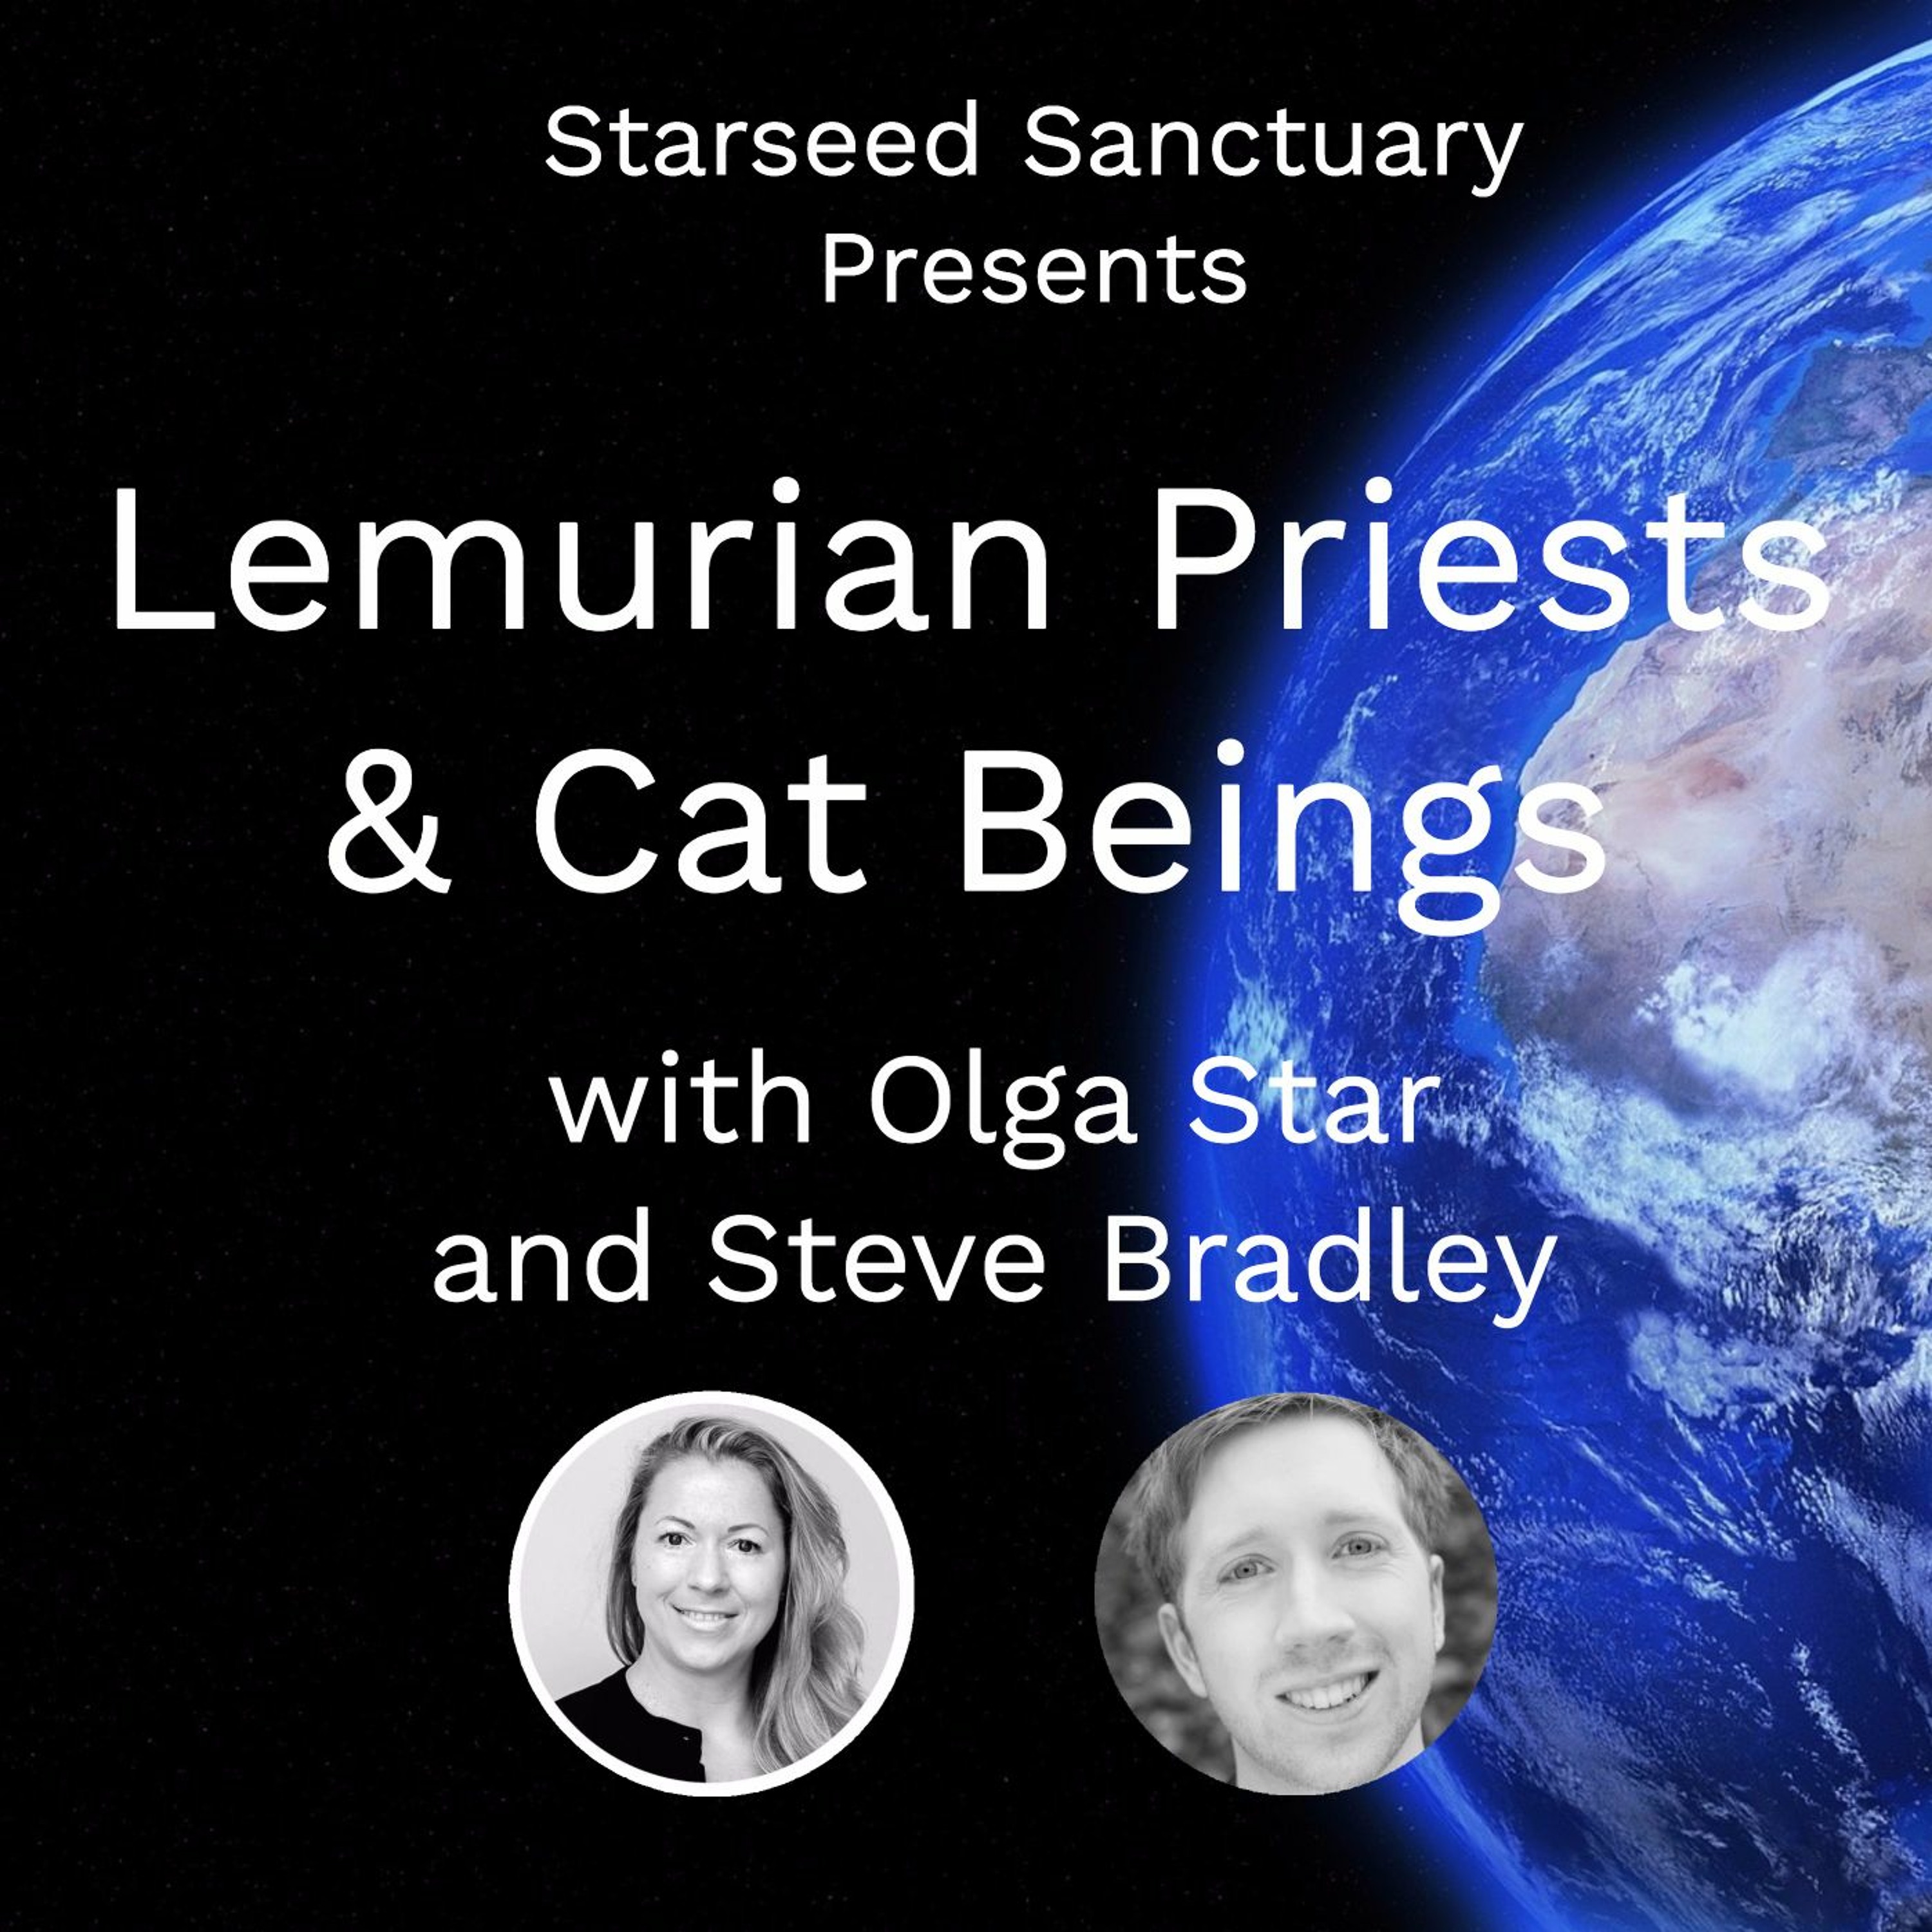 Lemurian Priests and Cat Beings